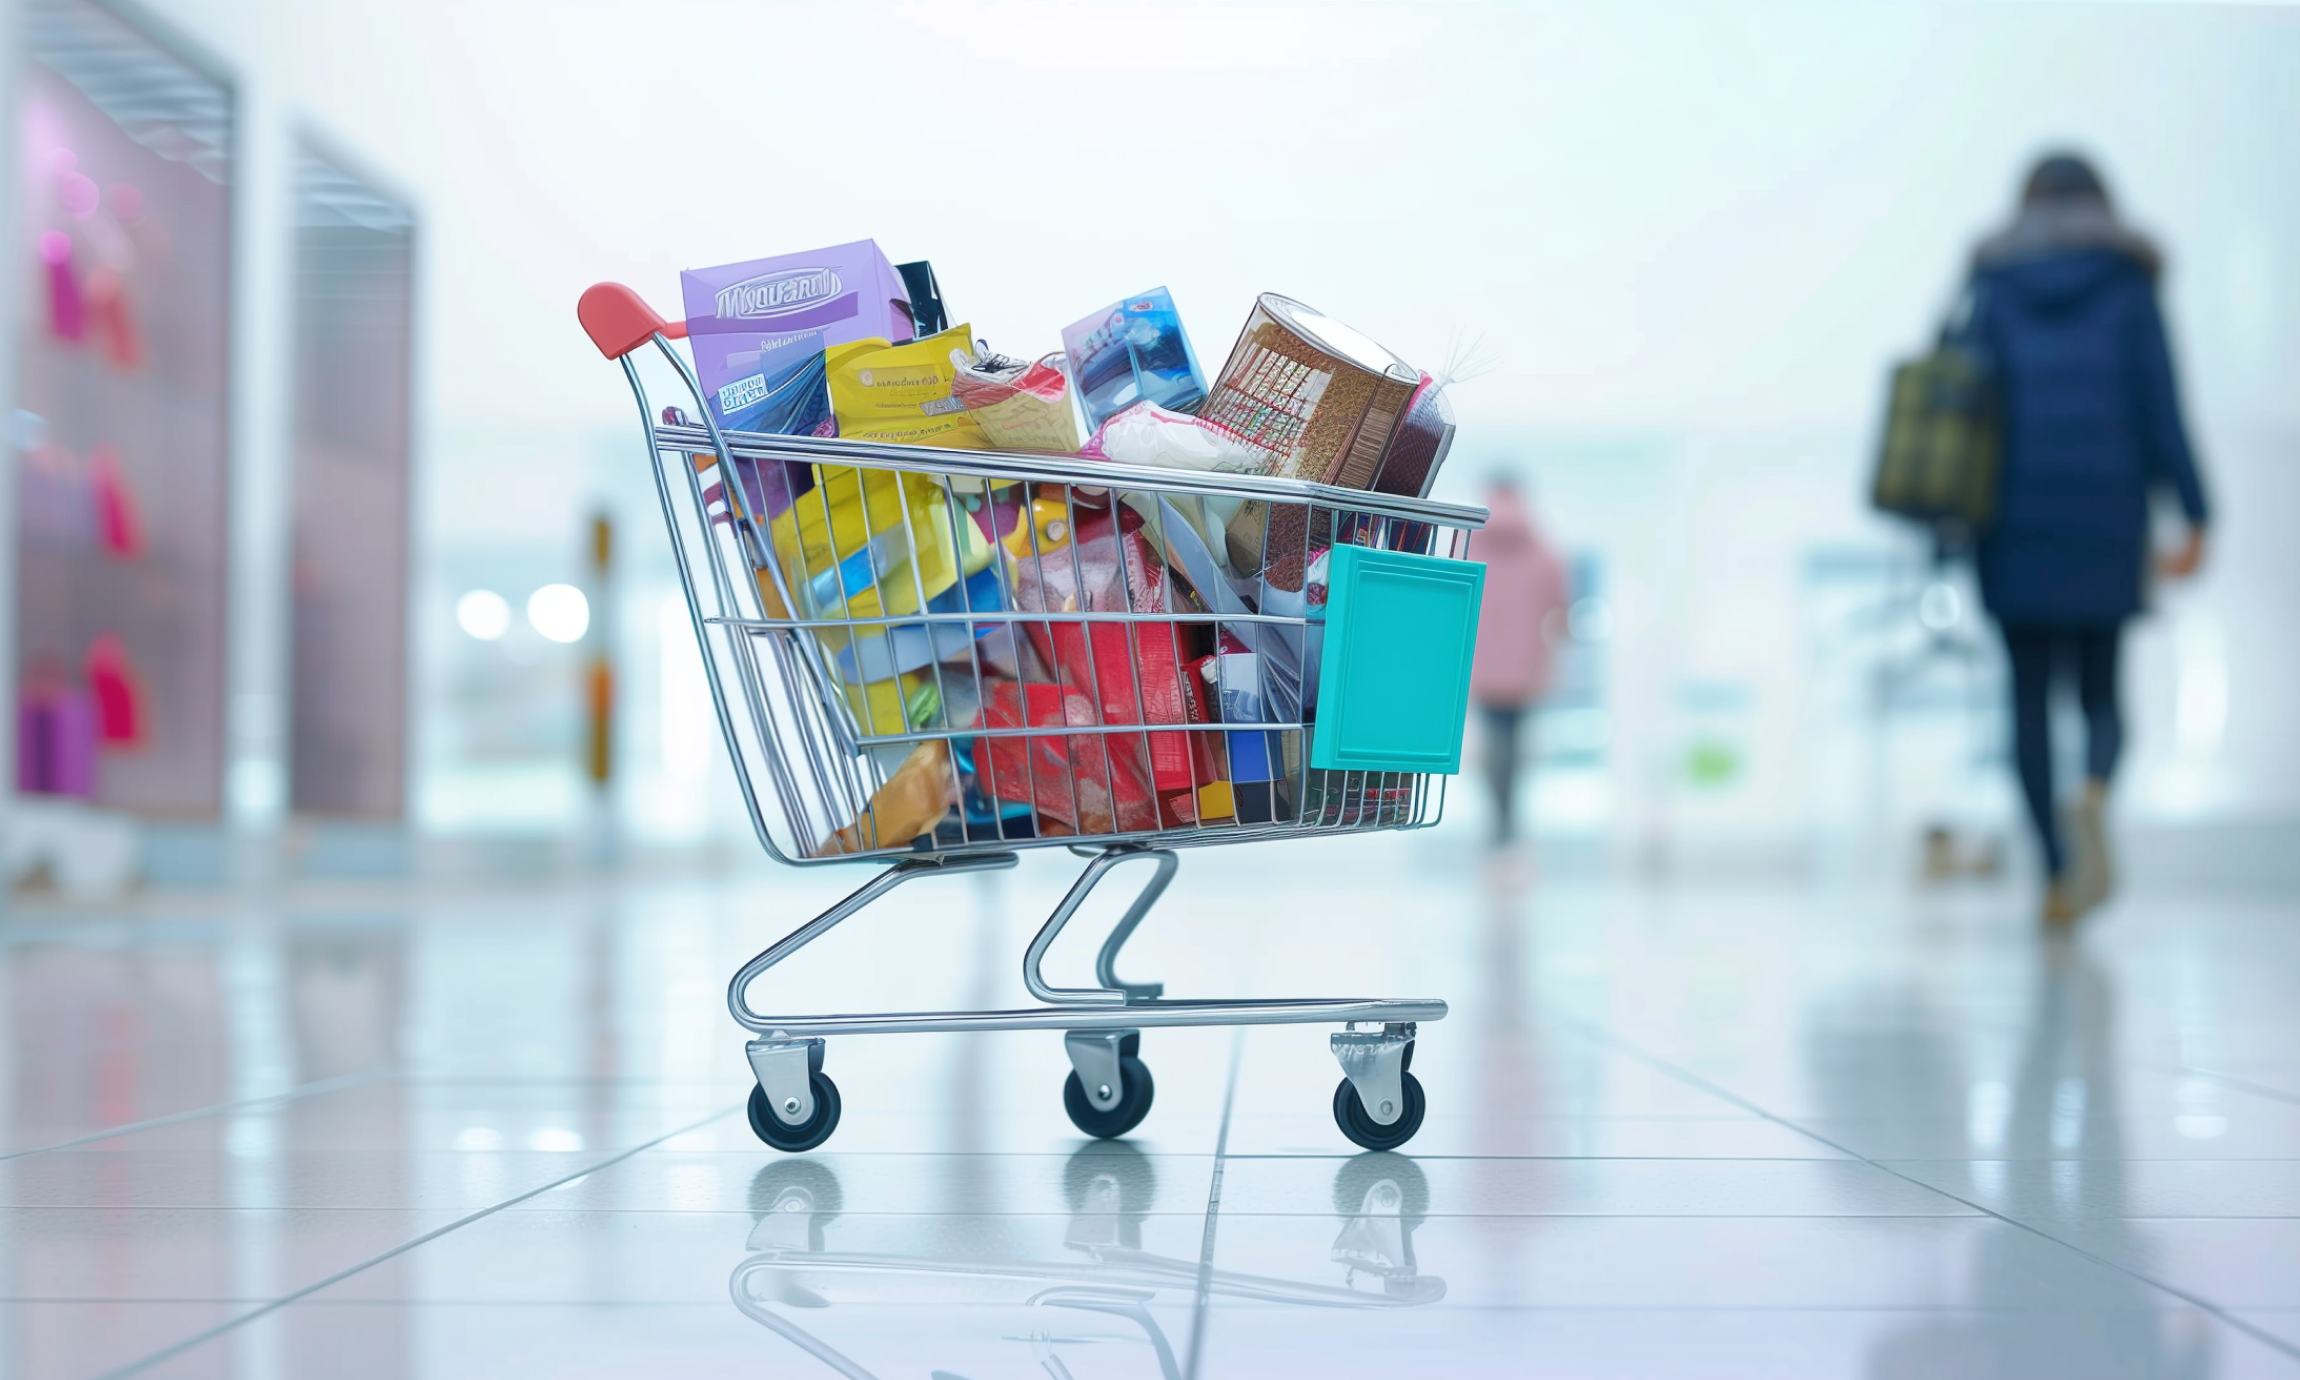 Fast and easy checkout is key to reducing cart abandonment